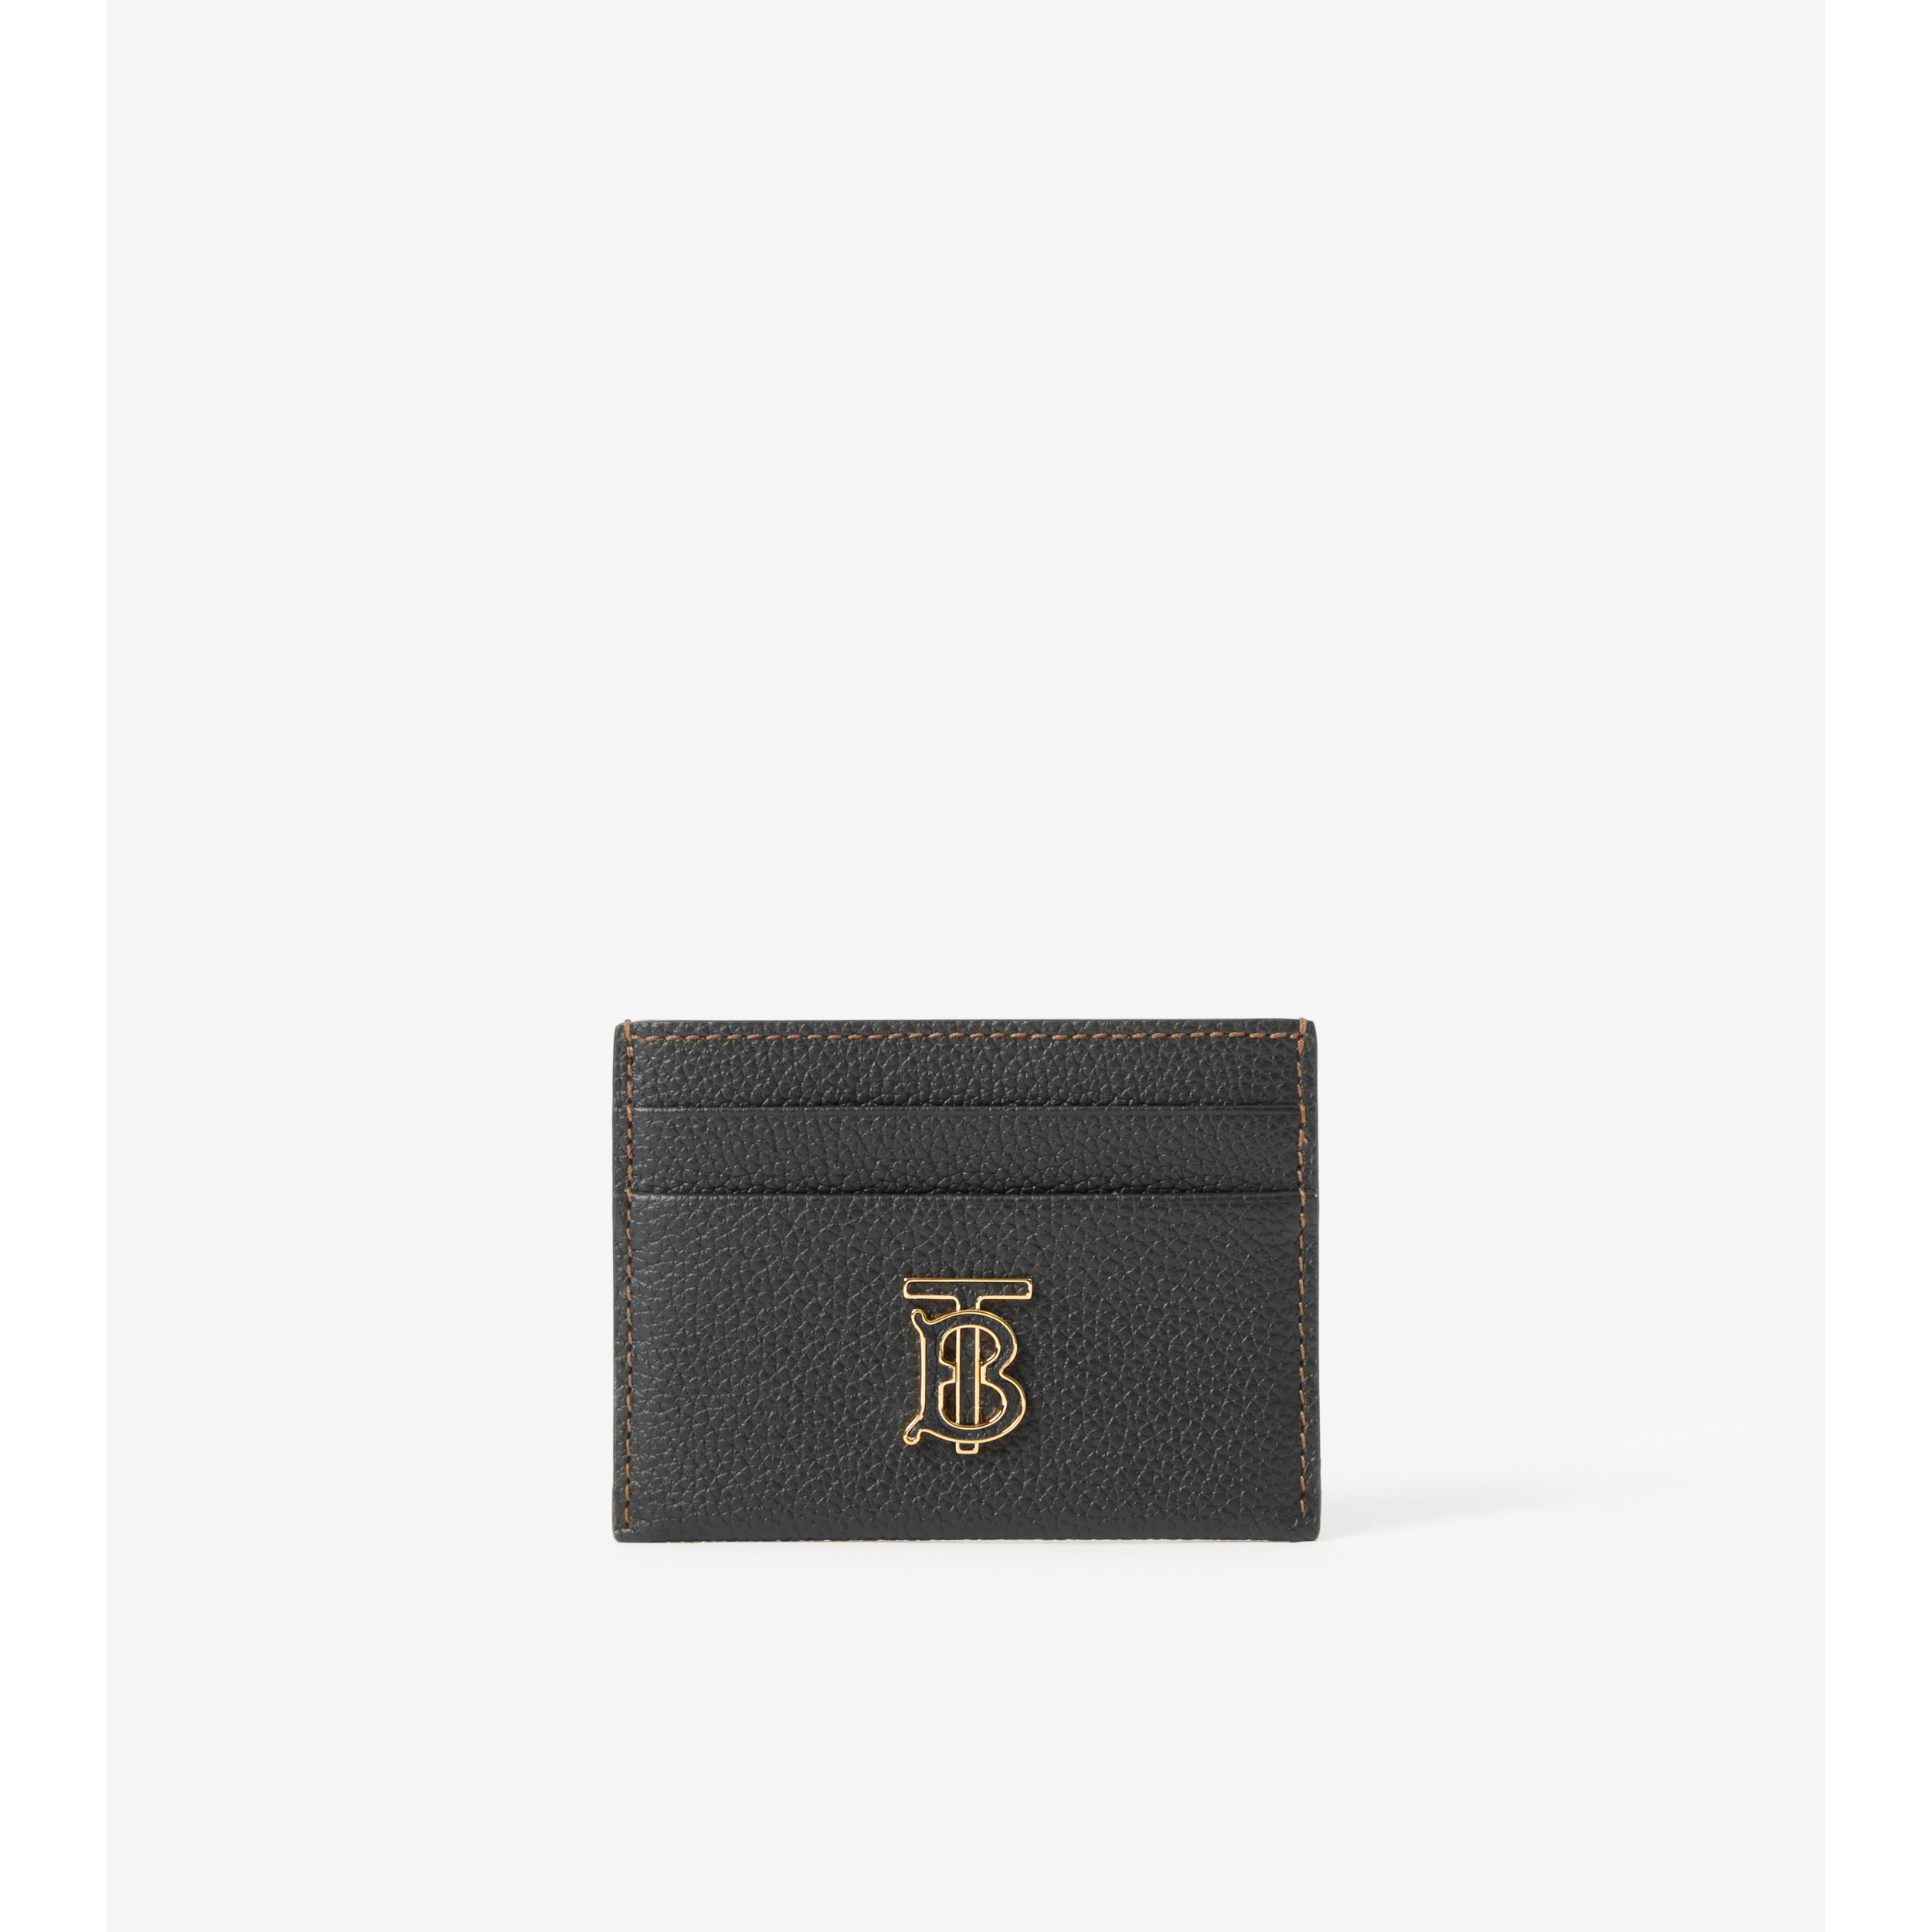 BURBERRY Grainy Leather Tb Card Case